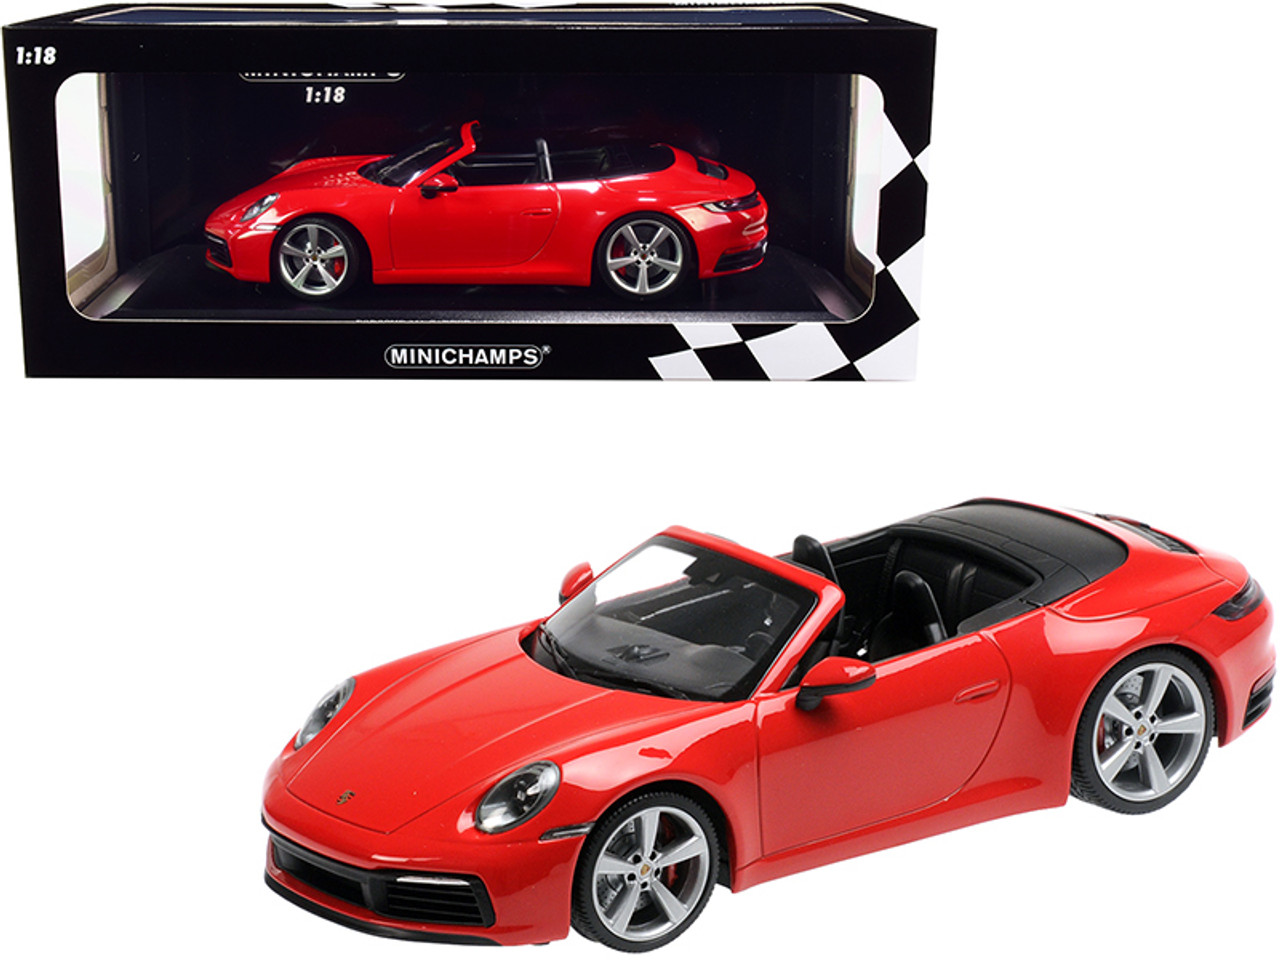 2019 Porsche 911 Carrera 4S Cabriolet Red Limited Edition to 504 pieces Worldwide 1/18 Diecast Model Car by Minichamps